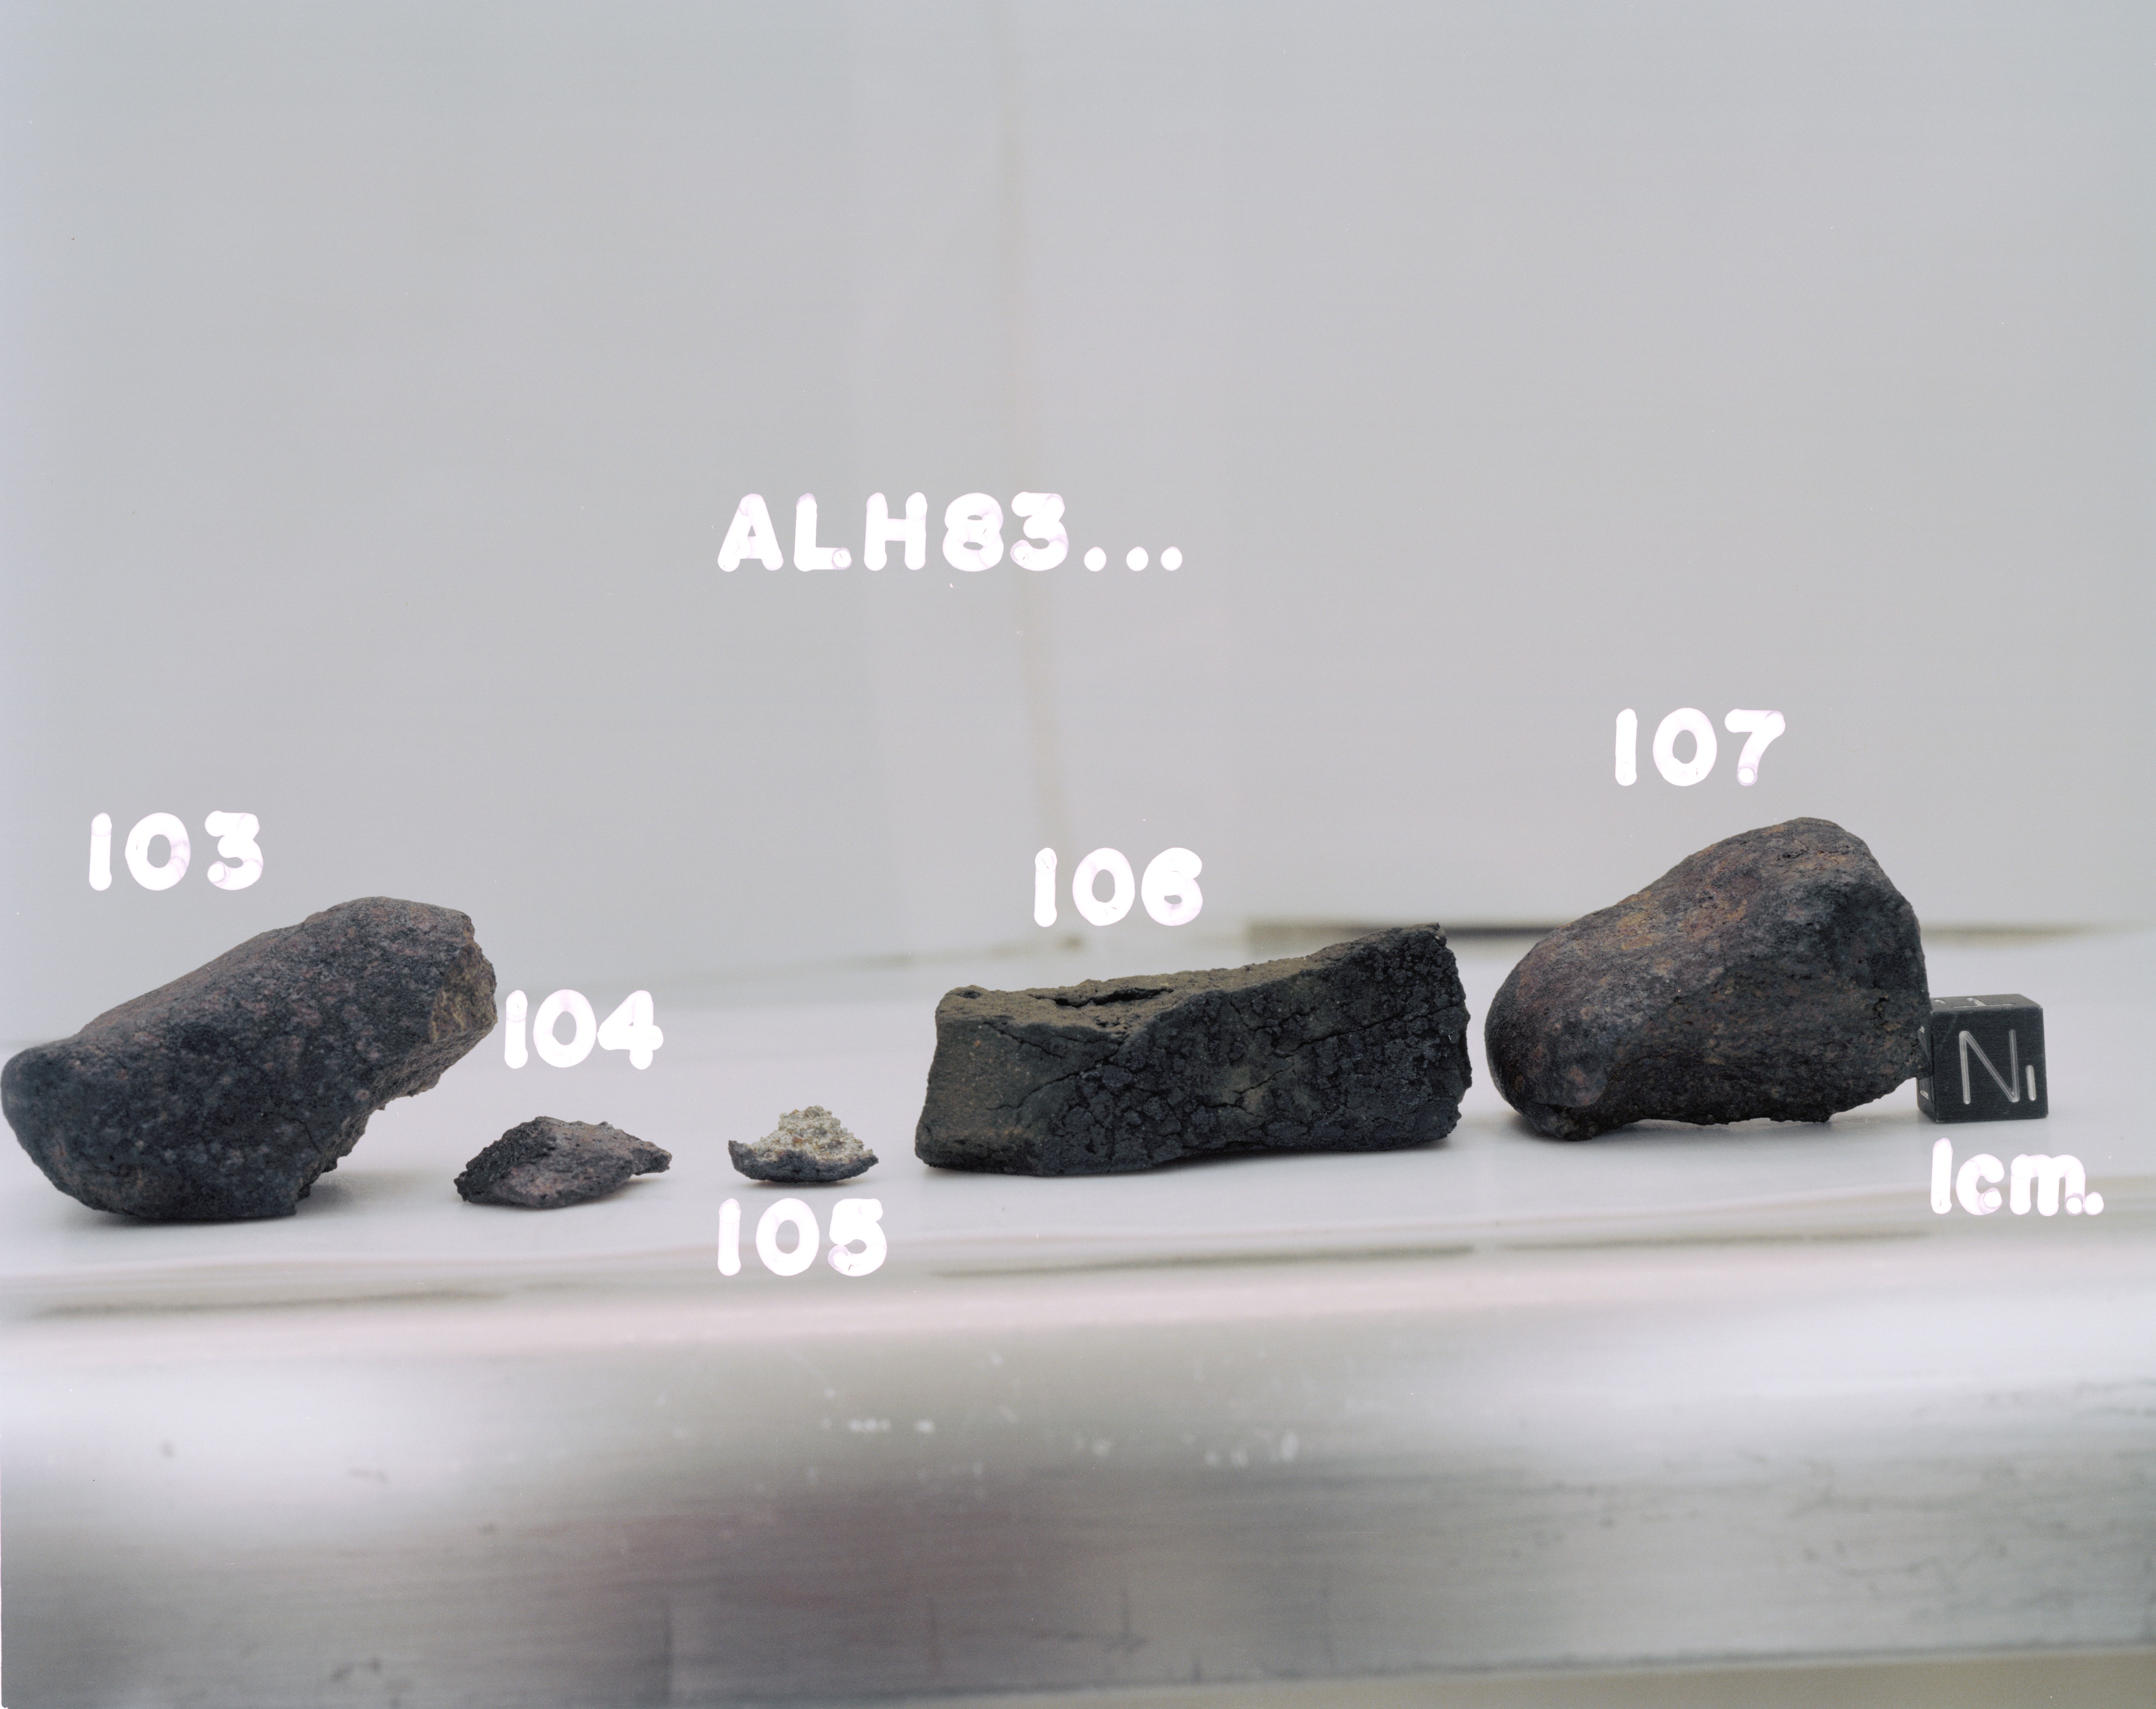 Lab Photo of Sample ALH 83106 (Photo Number s85-39556)